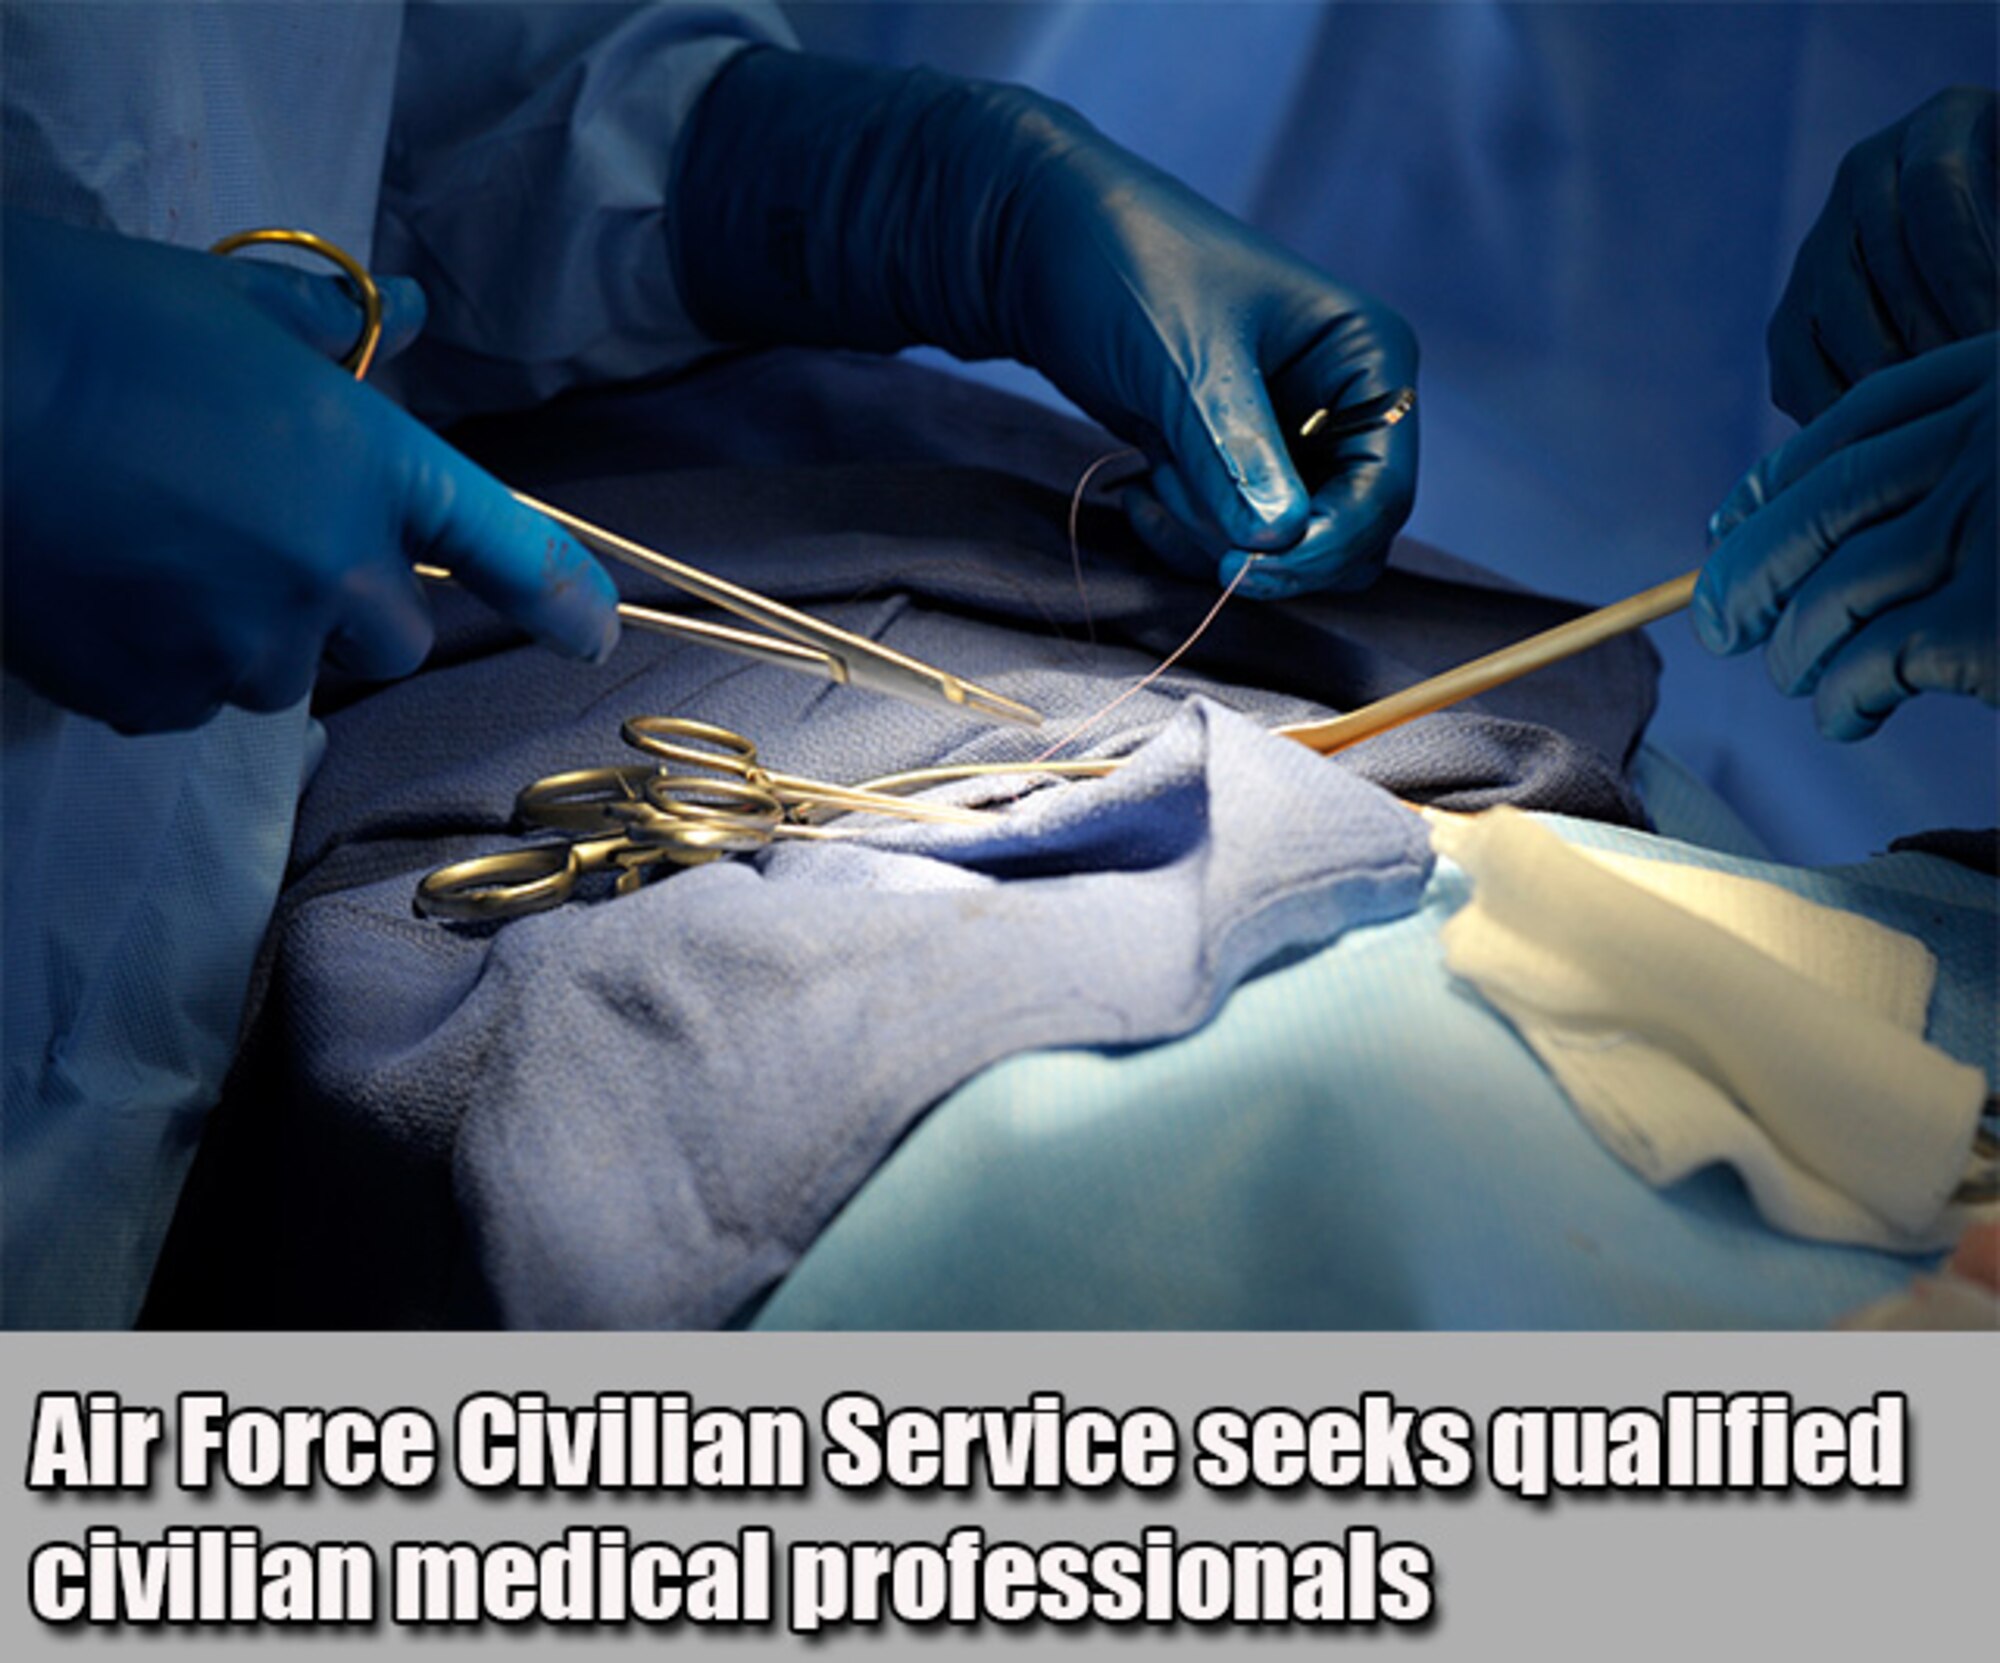 The Air Force Civilian Service offers exceptional job opportunities for civilian medical professionals in all specialties, purposeful work, competitive pay and more. You could play a vital role in helping nurture the family that keeps our Air Force strong and mission-ready. (AFPC courtesy graphic)